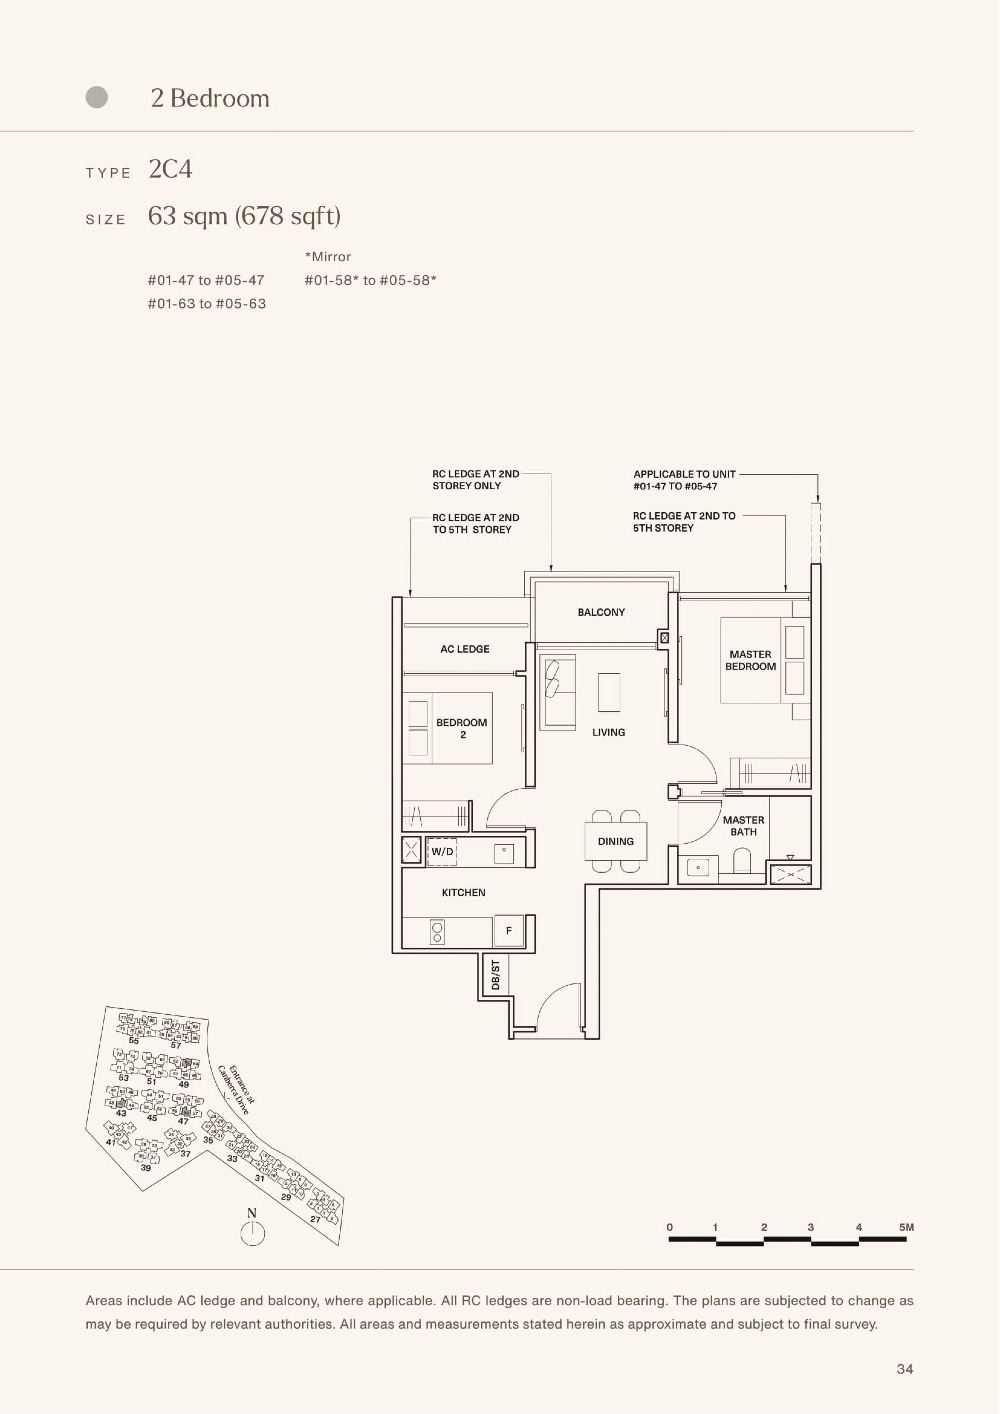 fp-the-watergardens-at-canberra-2c4-floor-plan.jpg